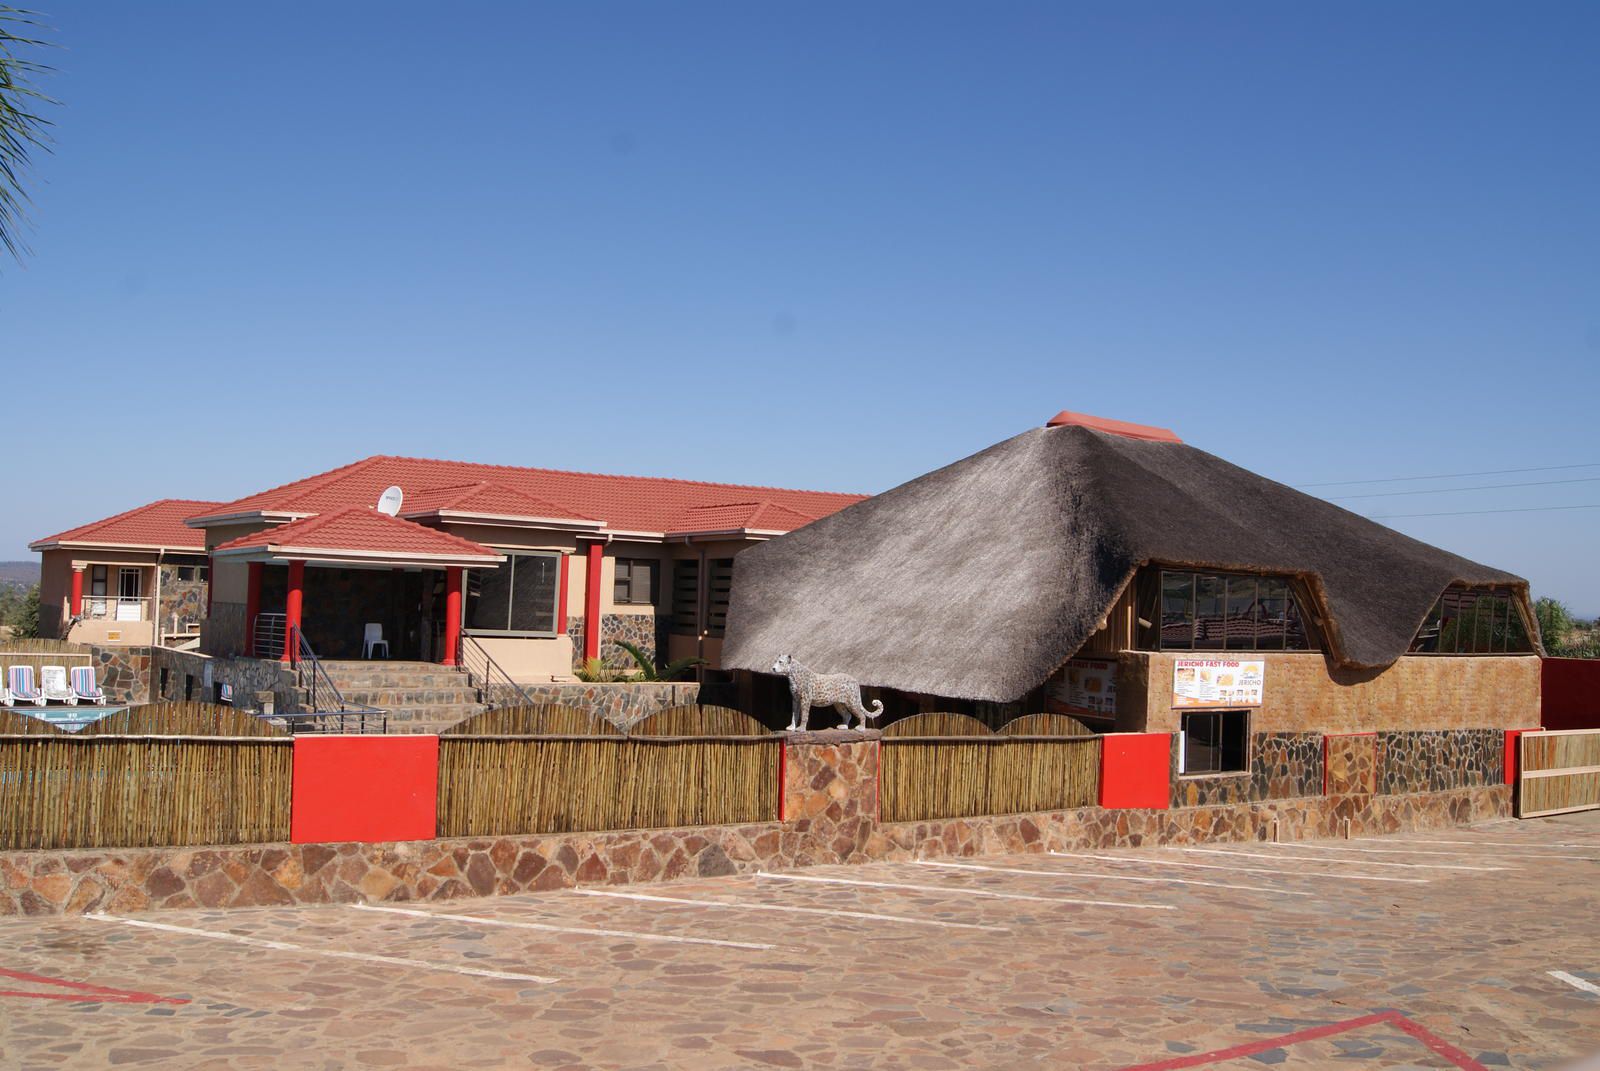 Jericho Hotel And Conferences Thohoyandou Limpopo Province South Africa Complementary Colors, Building, Architecture